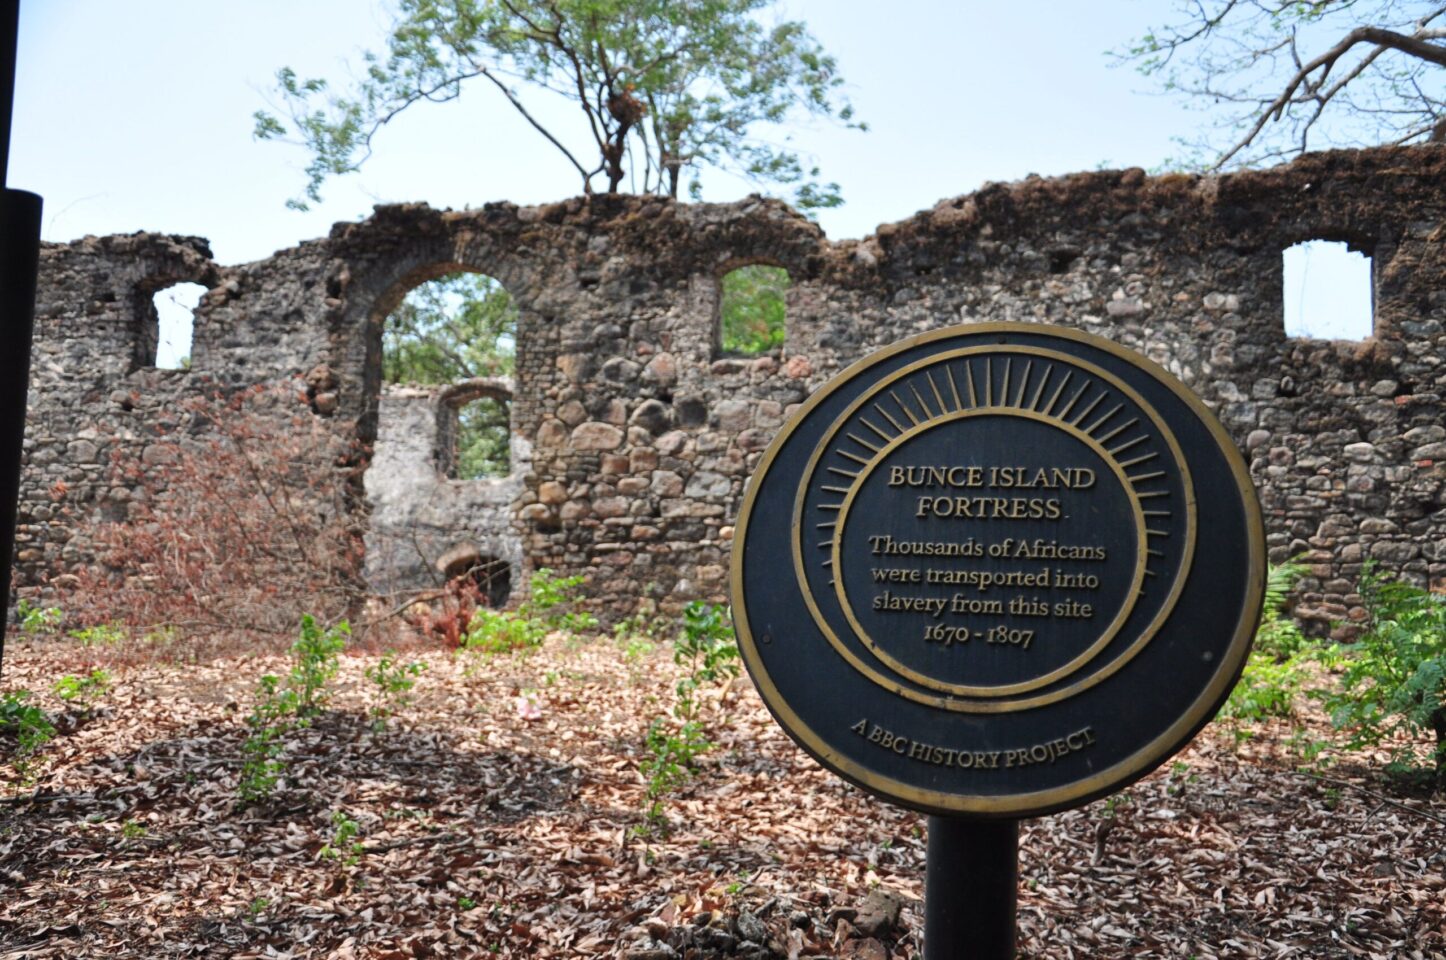 Step into history at Bunce Island Slave Fortress, a poignant reminder of Sierra Leone's past. #BunceIsland #SierraLeoneHistory. Photo Credit: tourismsierraleone.com